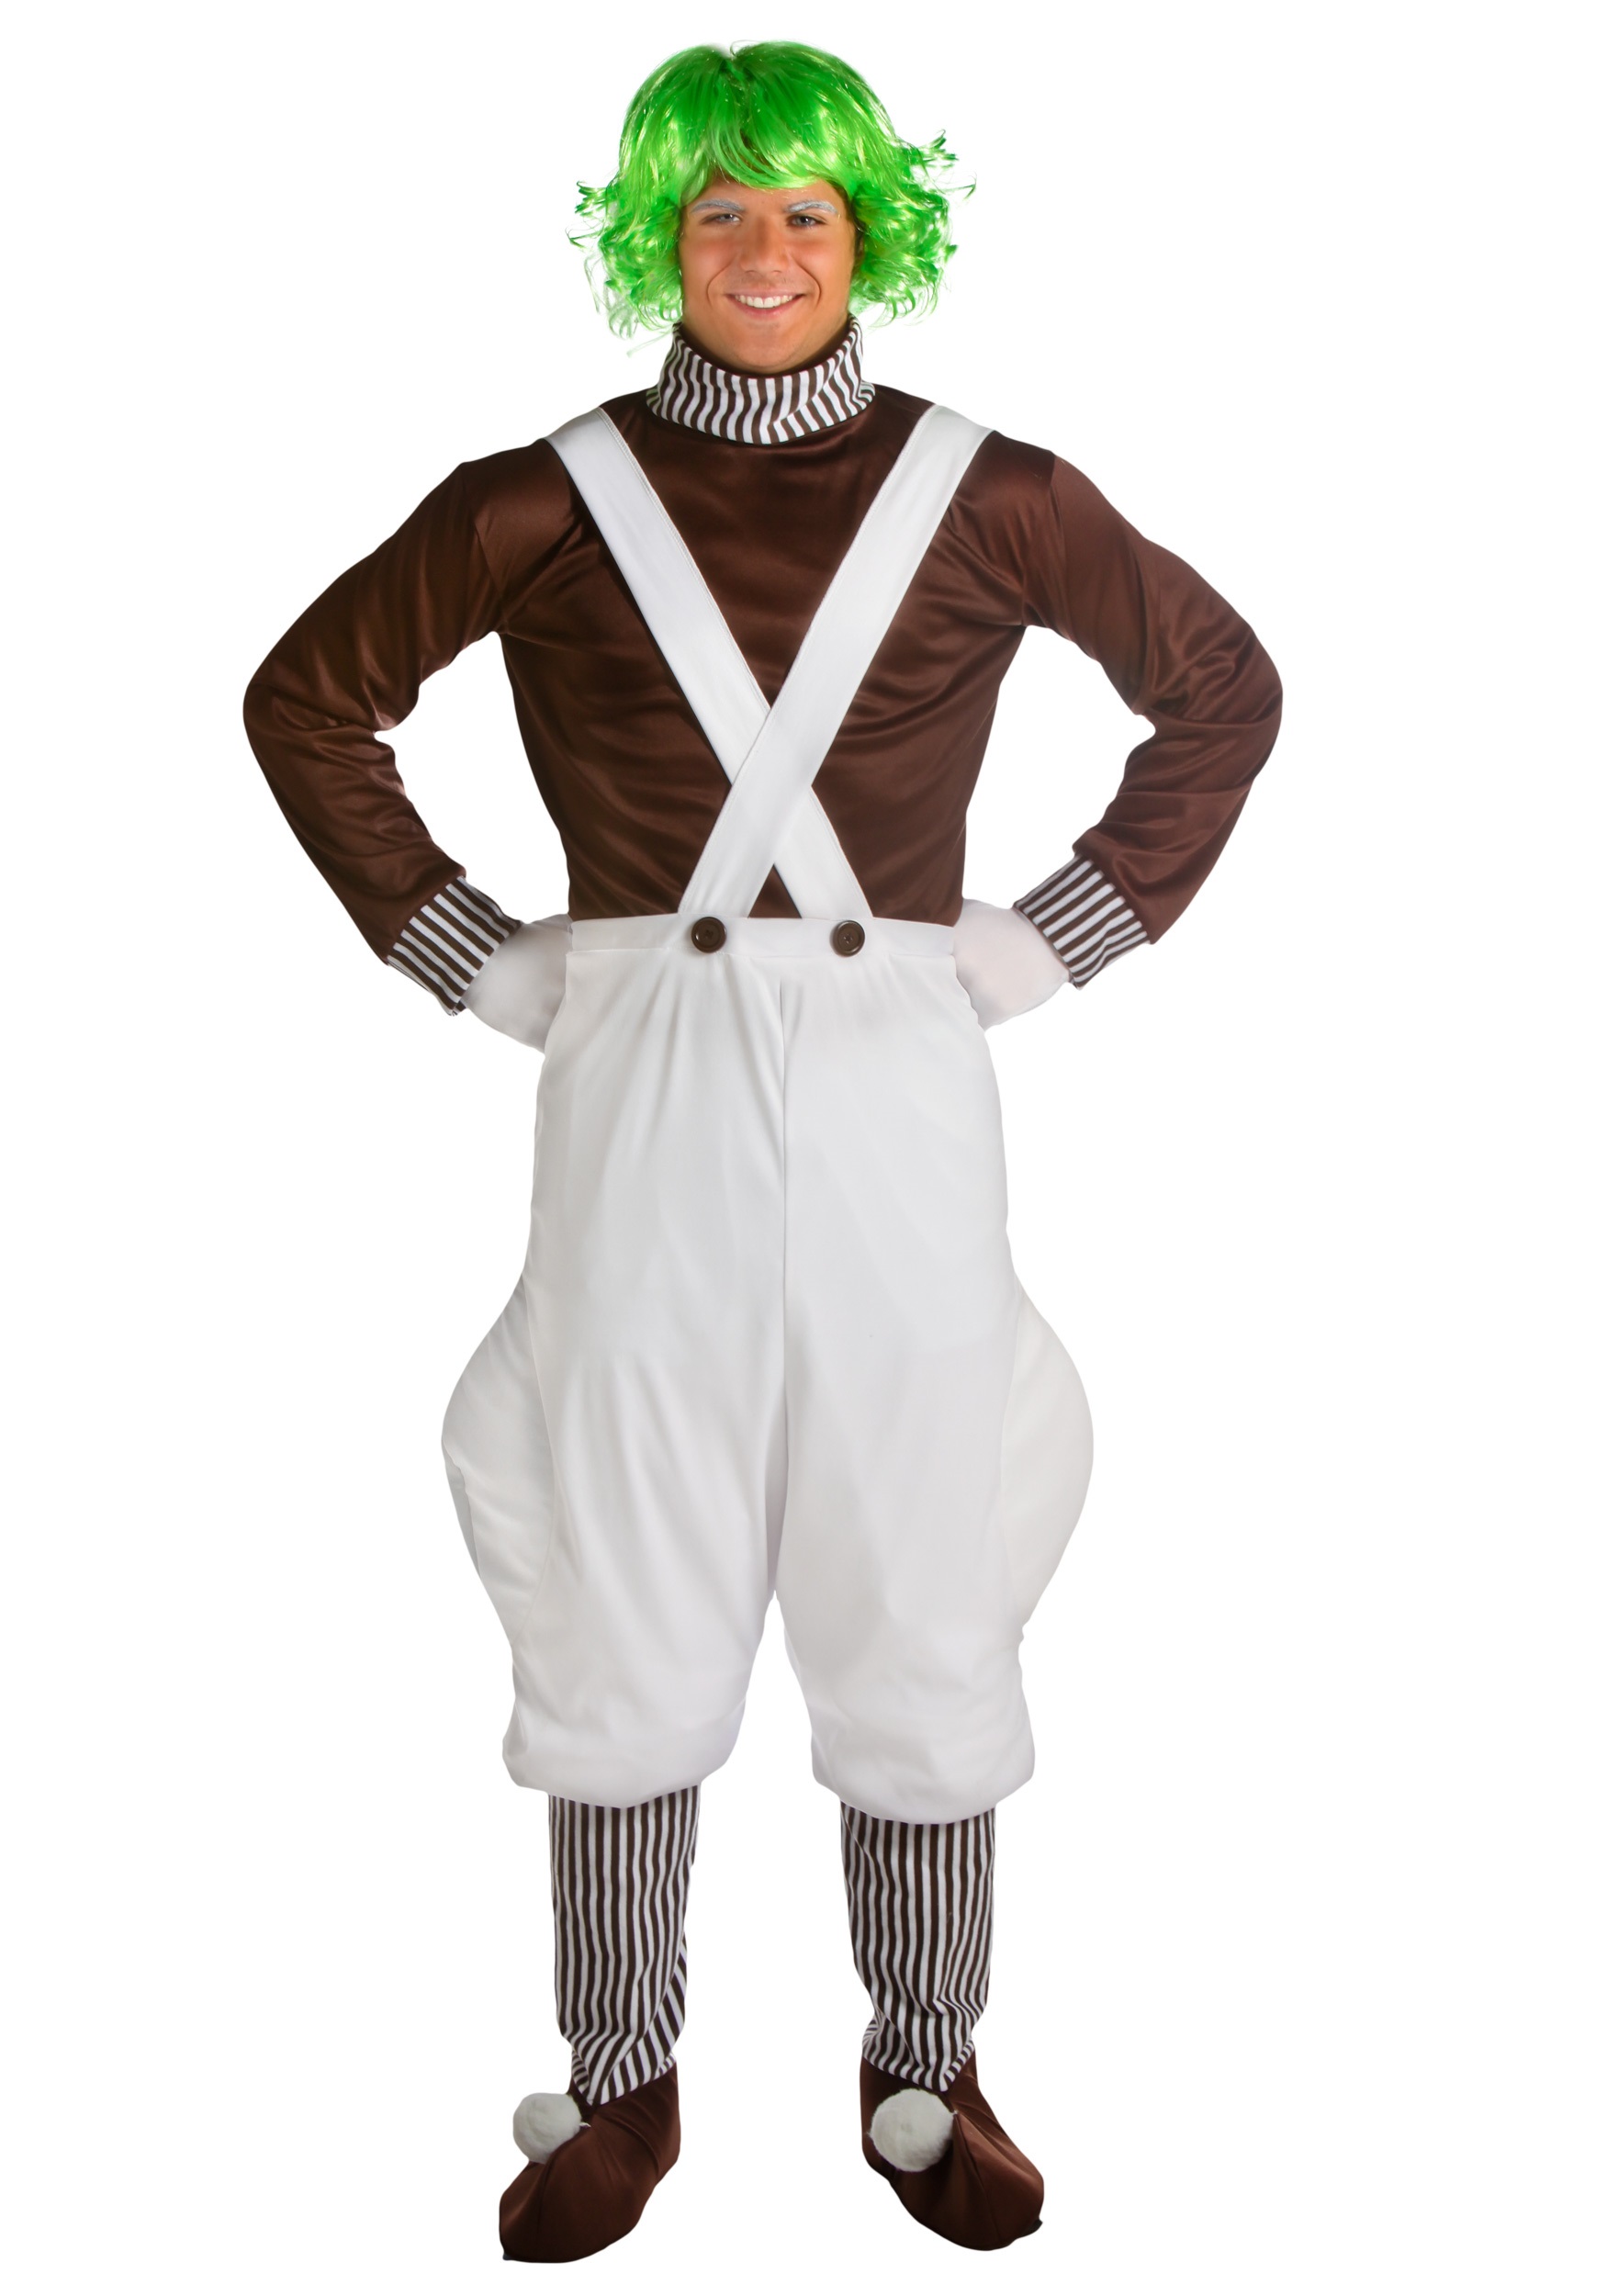 Photos - Fancy Dress Classic FUN Costumes  Chocolate Factory Worker Costume for Adults | Movie C 